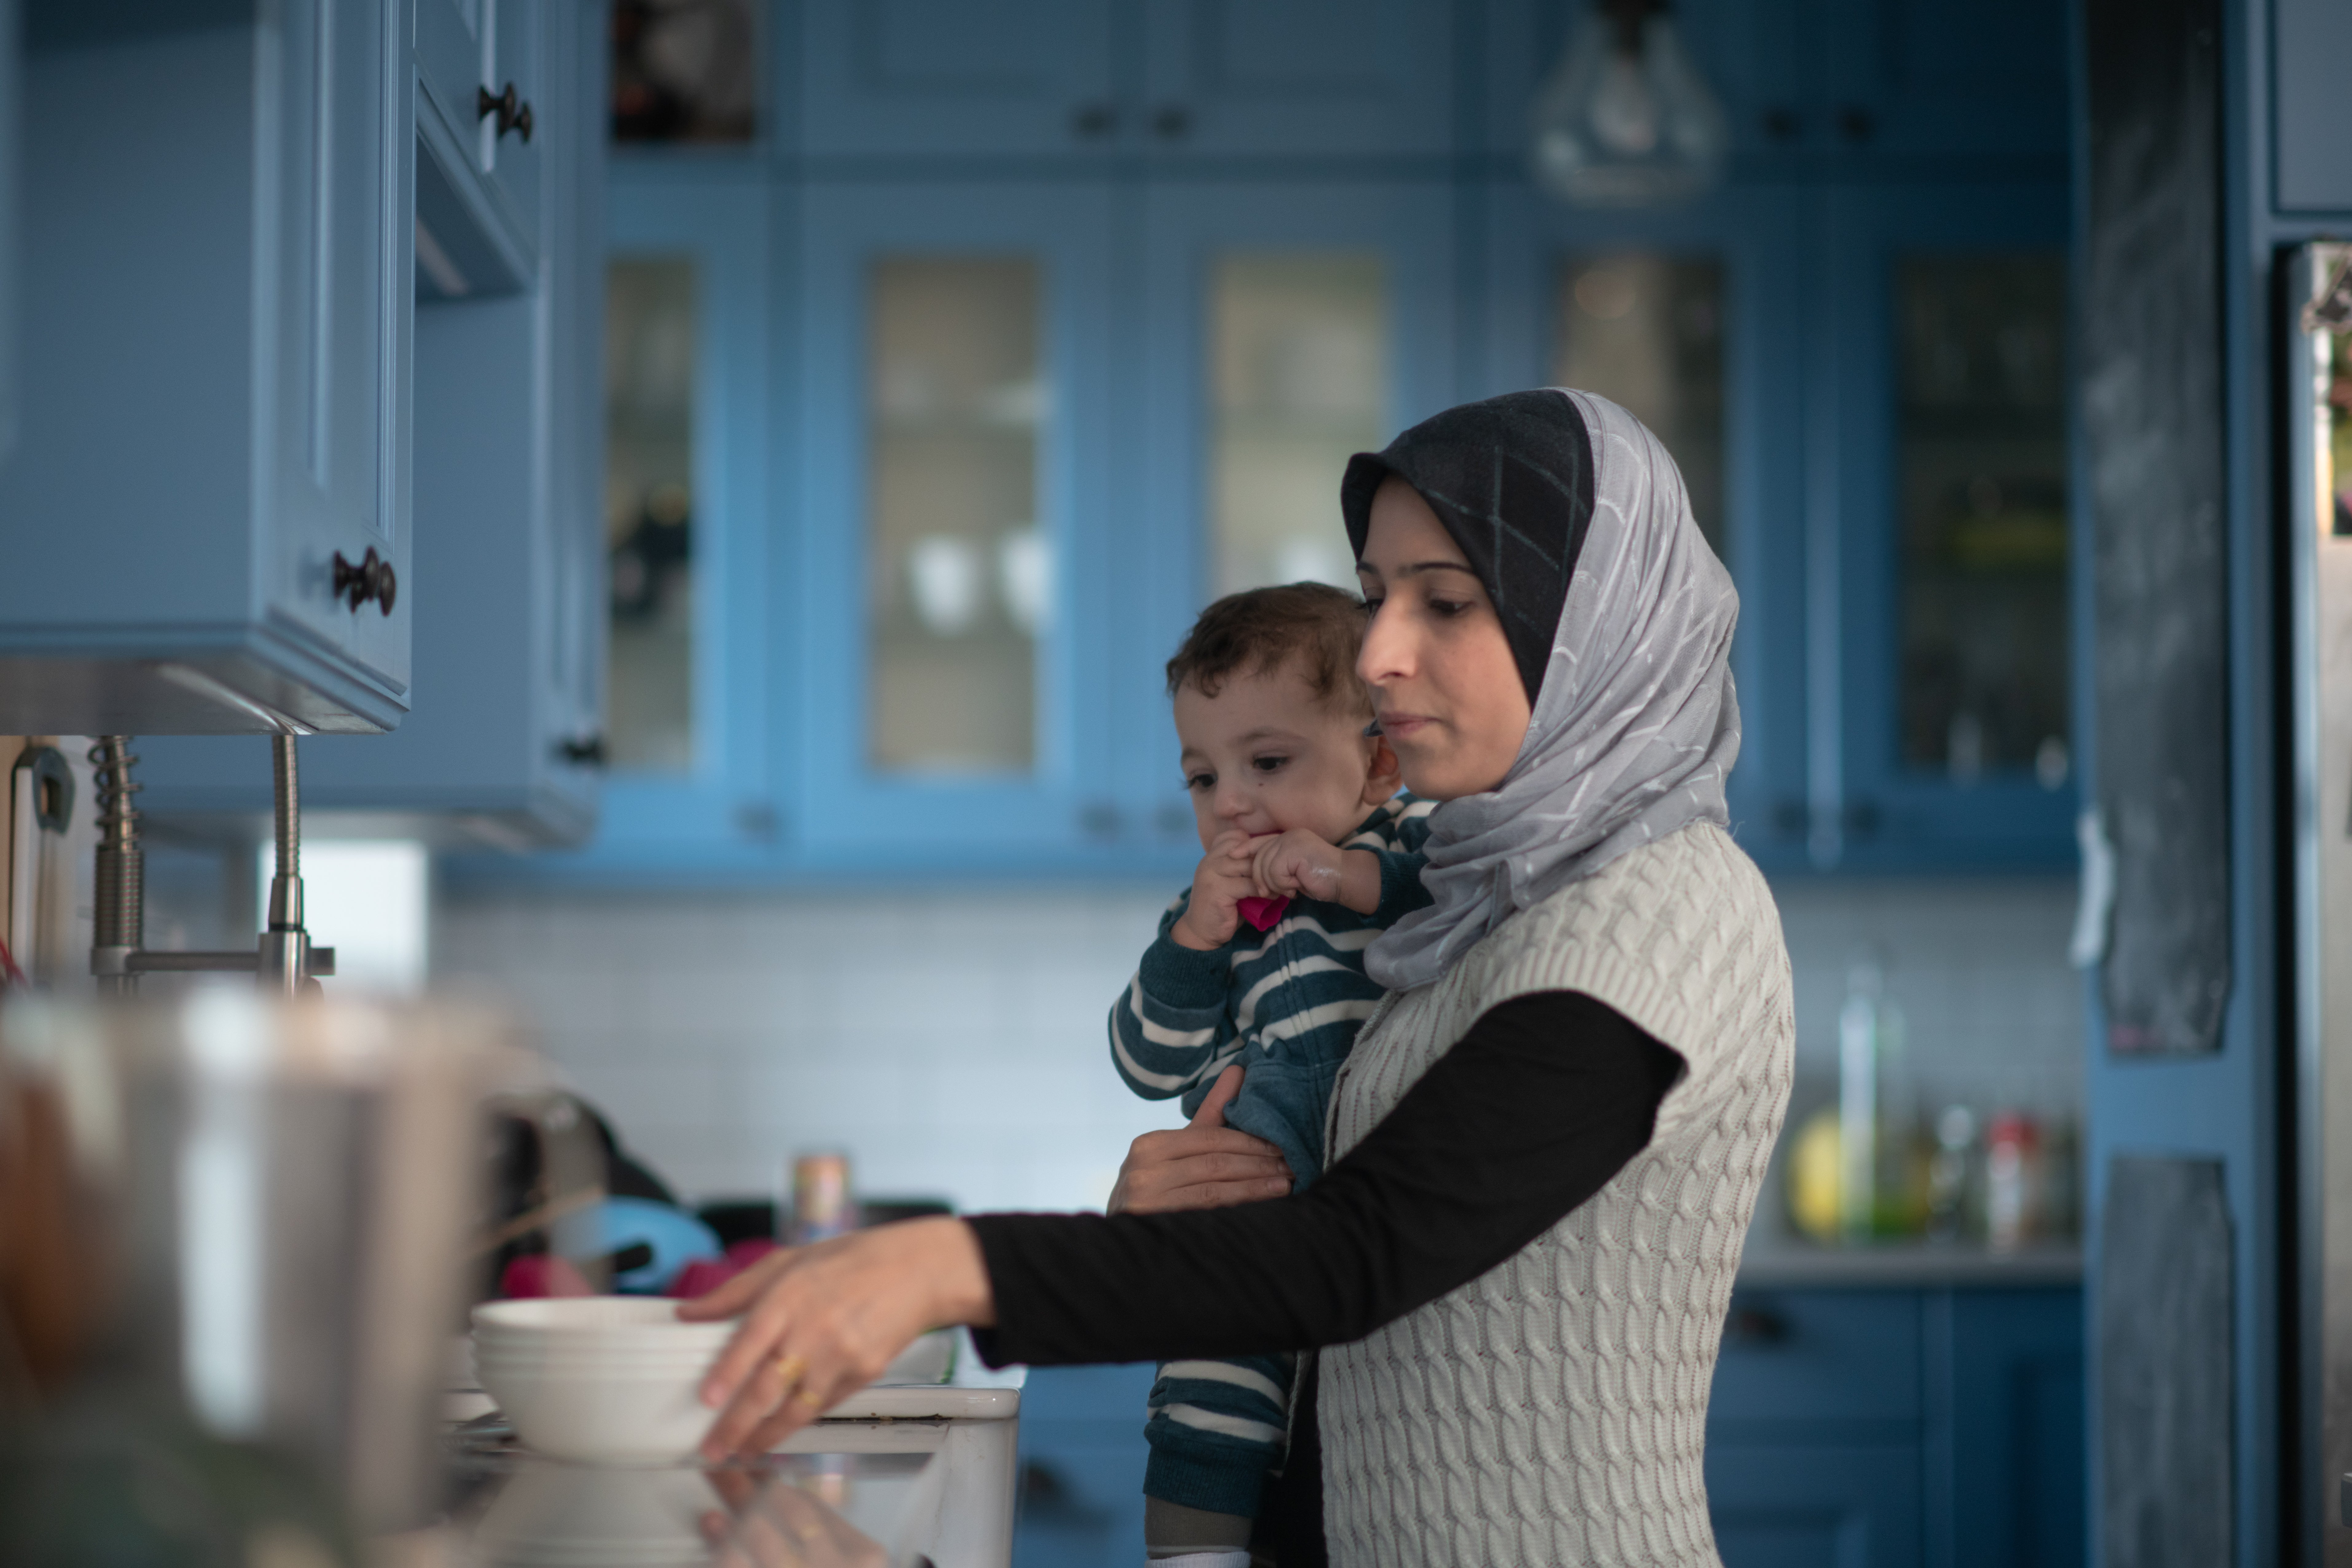 As a twentysomething Muslim woman with a new baby, I find myself unrepresented in everything I read and watch